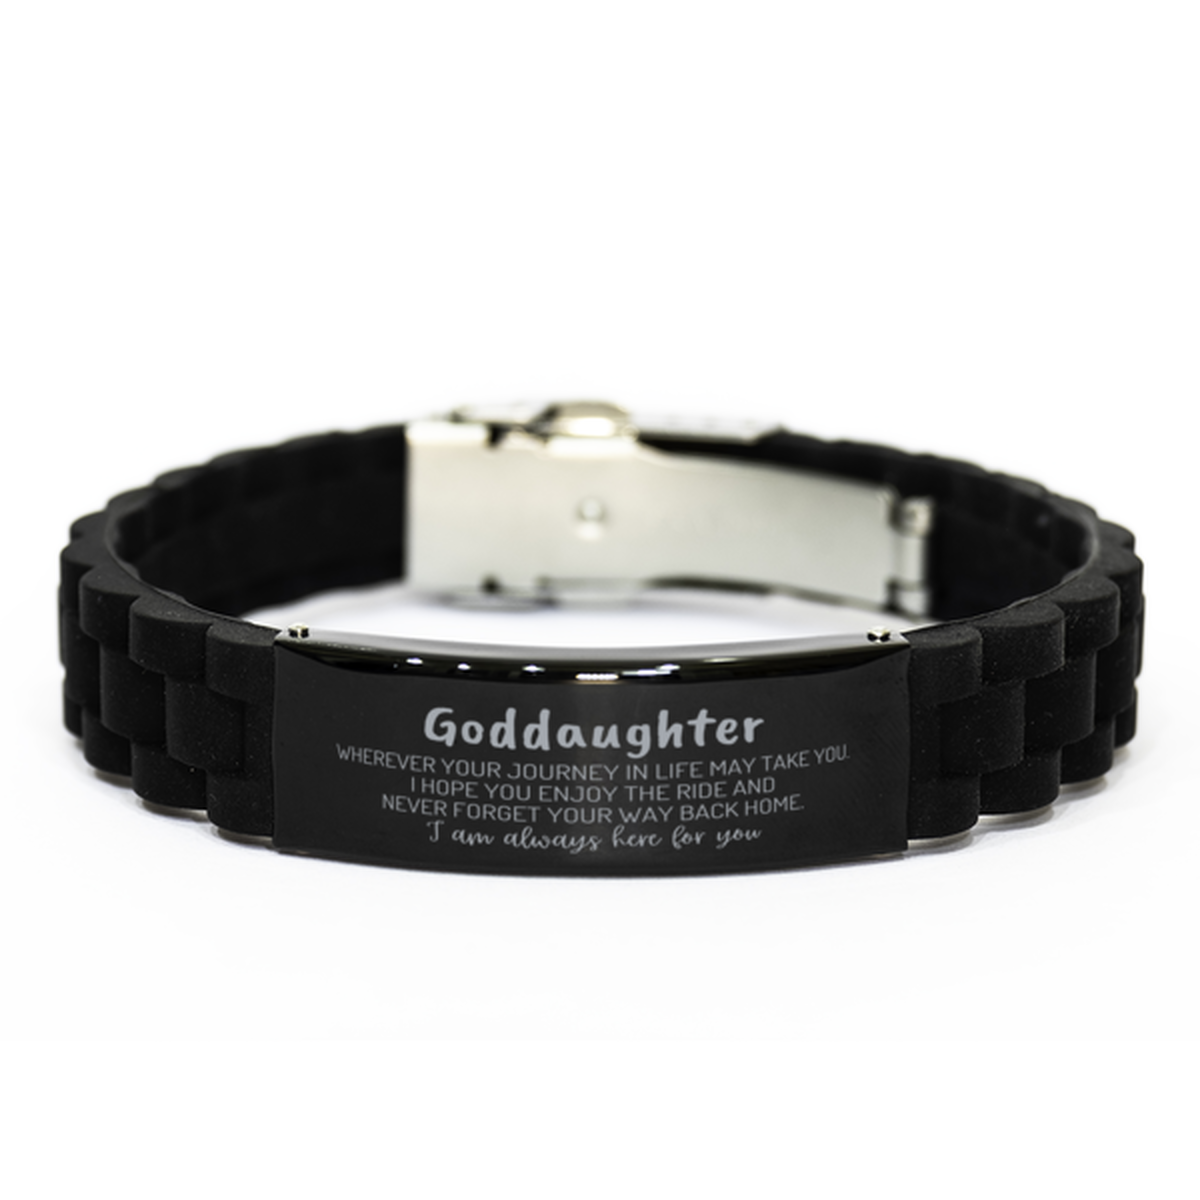 Goddaughter wherever your journey in life may take you, I am always here for you Goddaughter Black Glidelock Clasp Bracelet, Awesome Christmas Gifts For Goddaughter, Goddaughter Birthday Gifts for Men Women Family Loved One